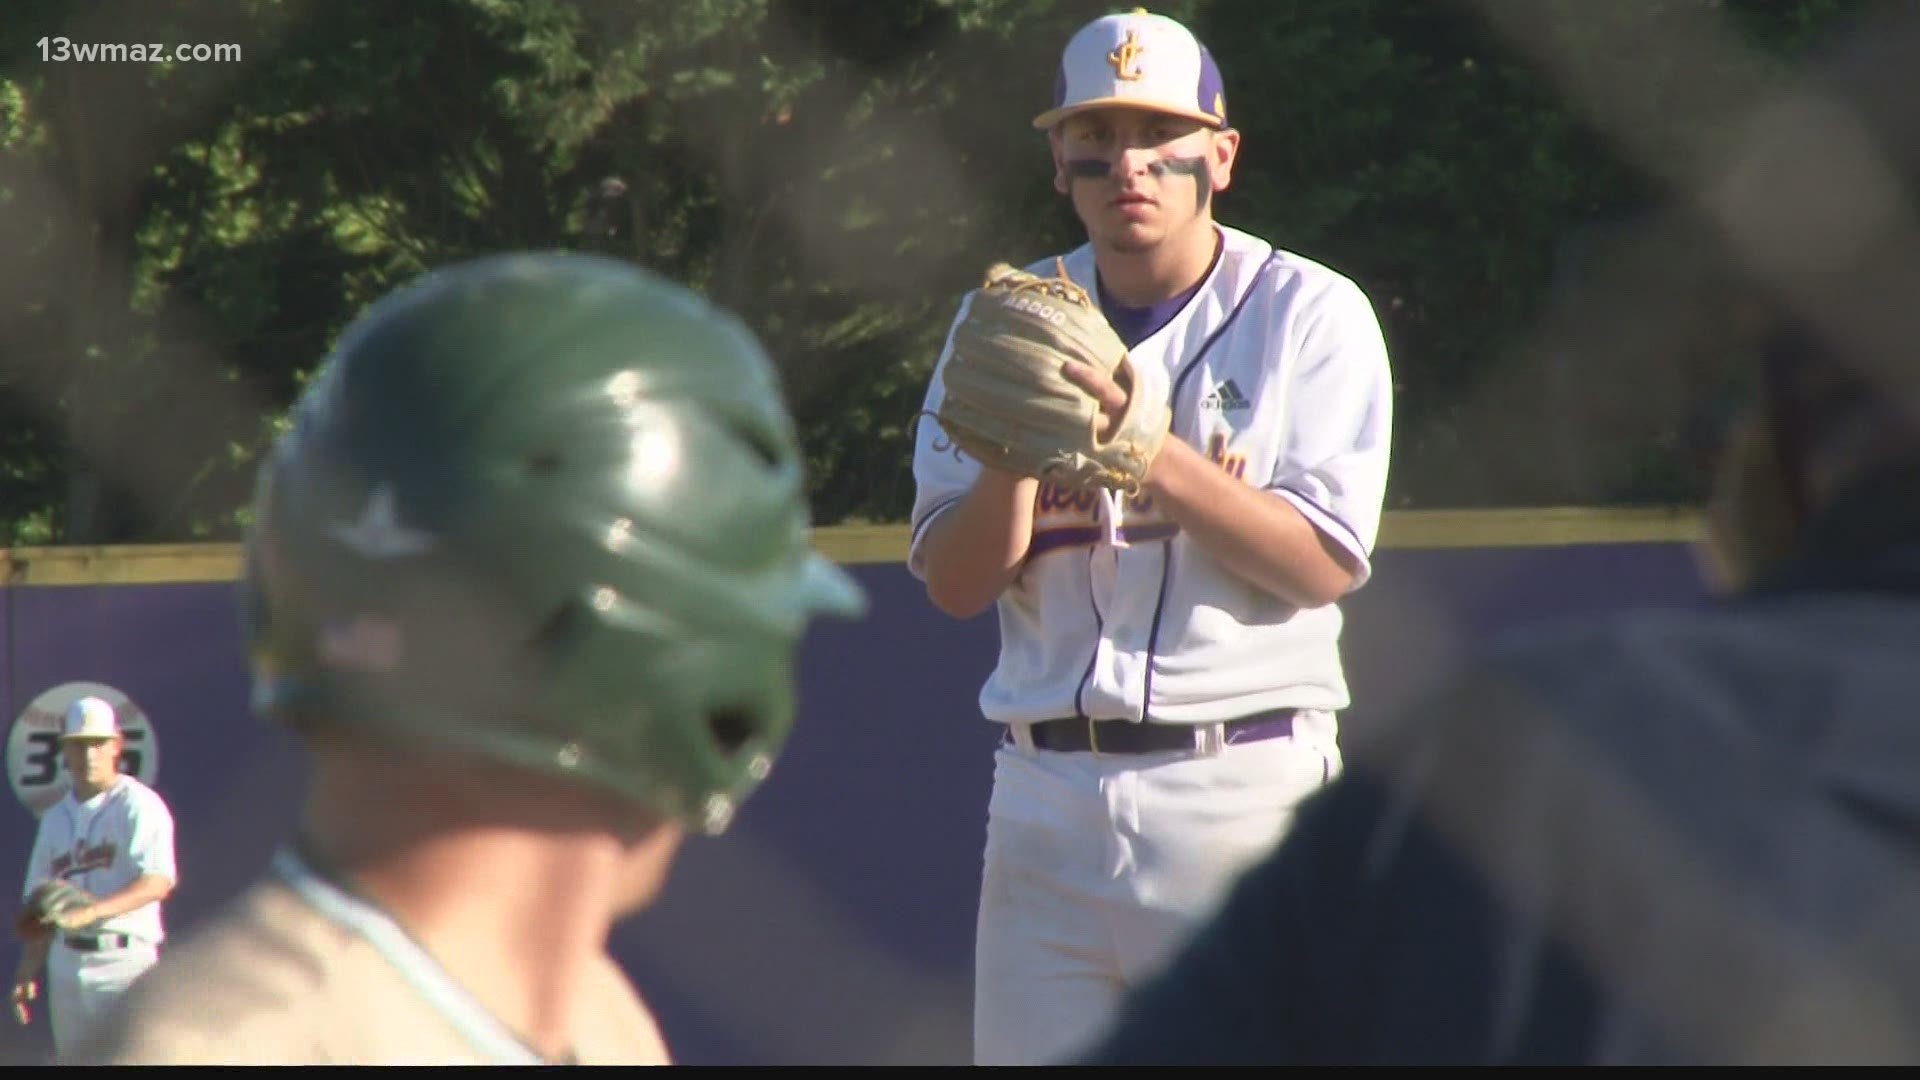 The Jones County Greyhounds tried to put a dent in Ola's bid for the 5A region 4 1st place.